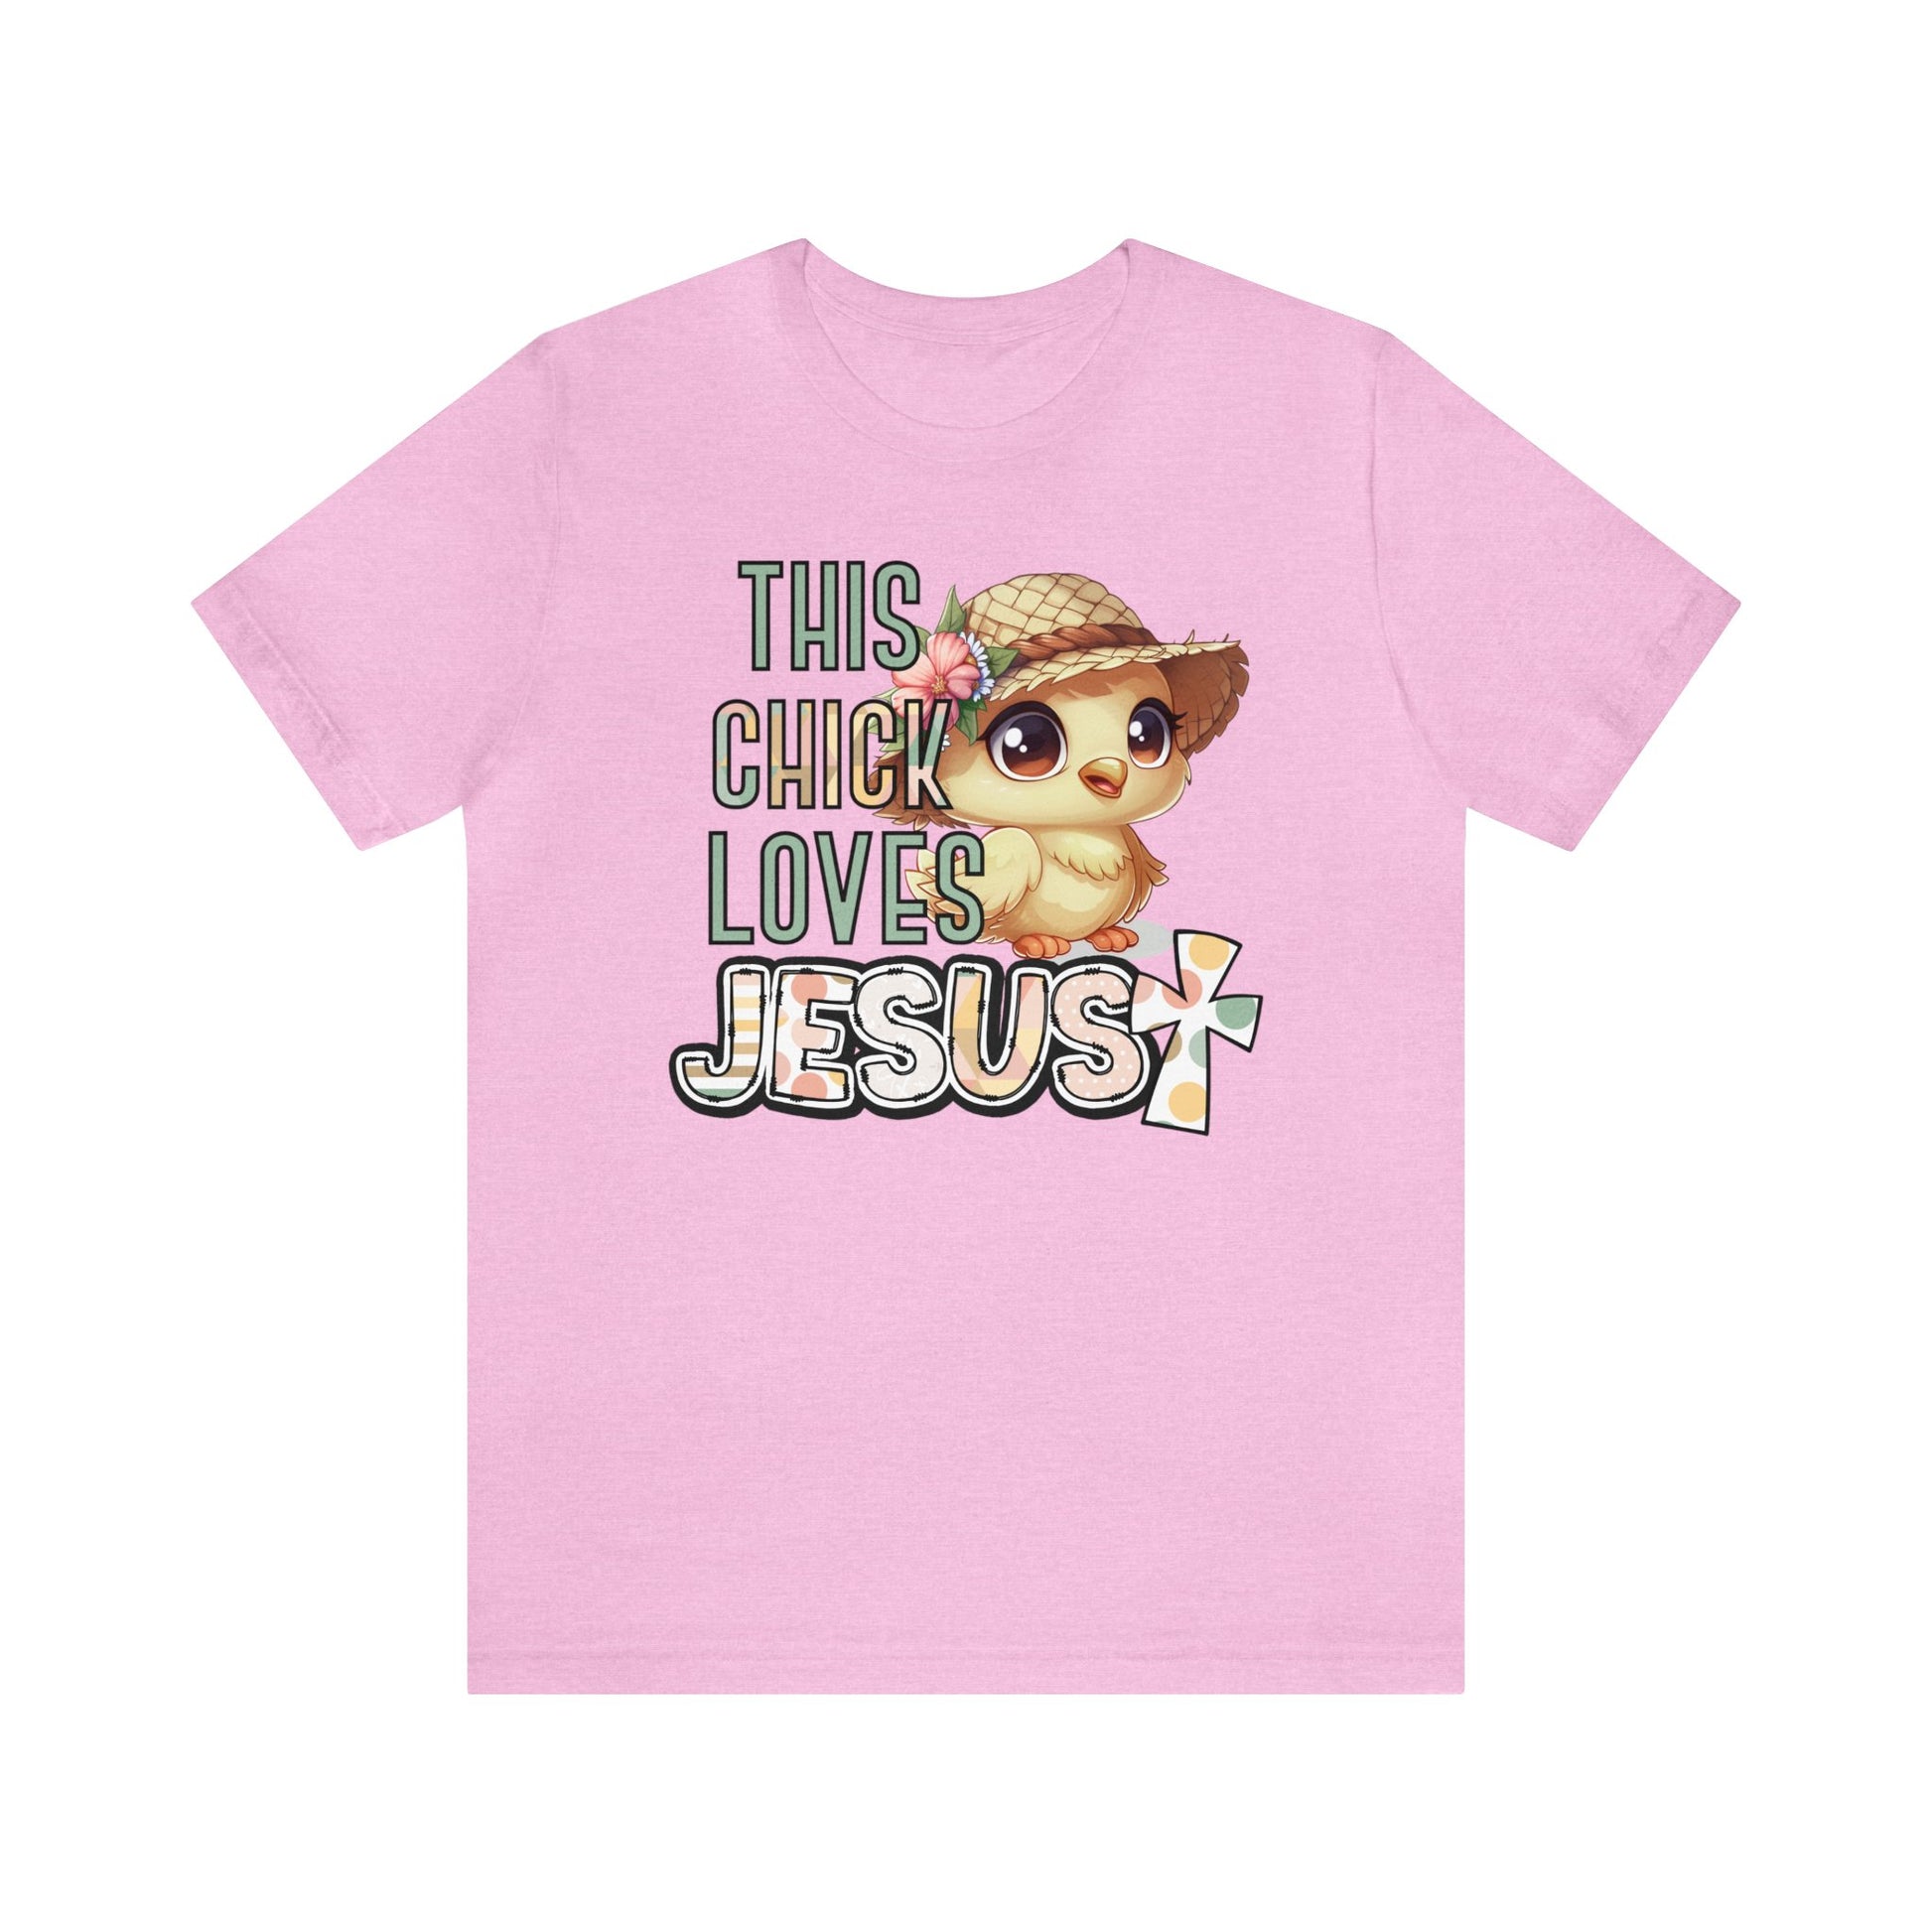 This Chick Loves Jesus T-shirt